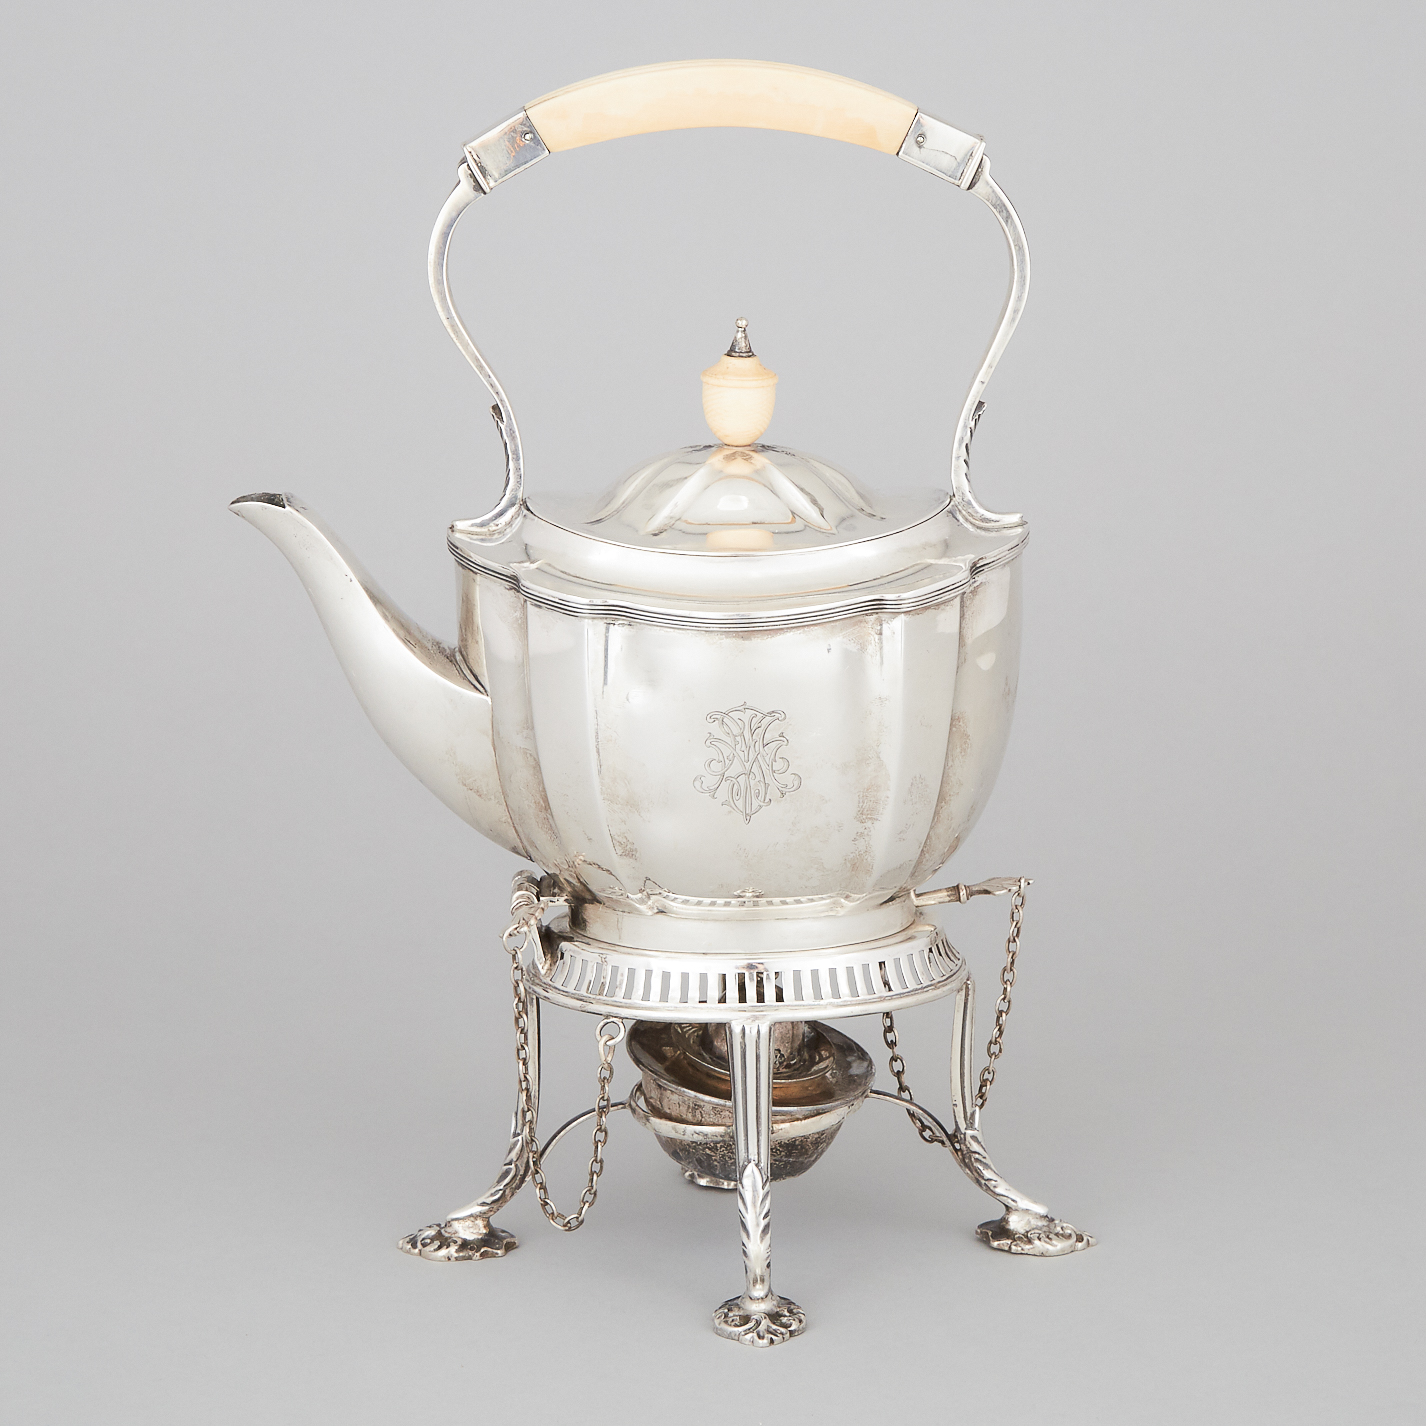 Edwardian Silver Kettle on Lampstand, William Hutton & Sons, London, 1909